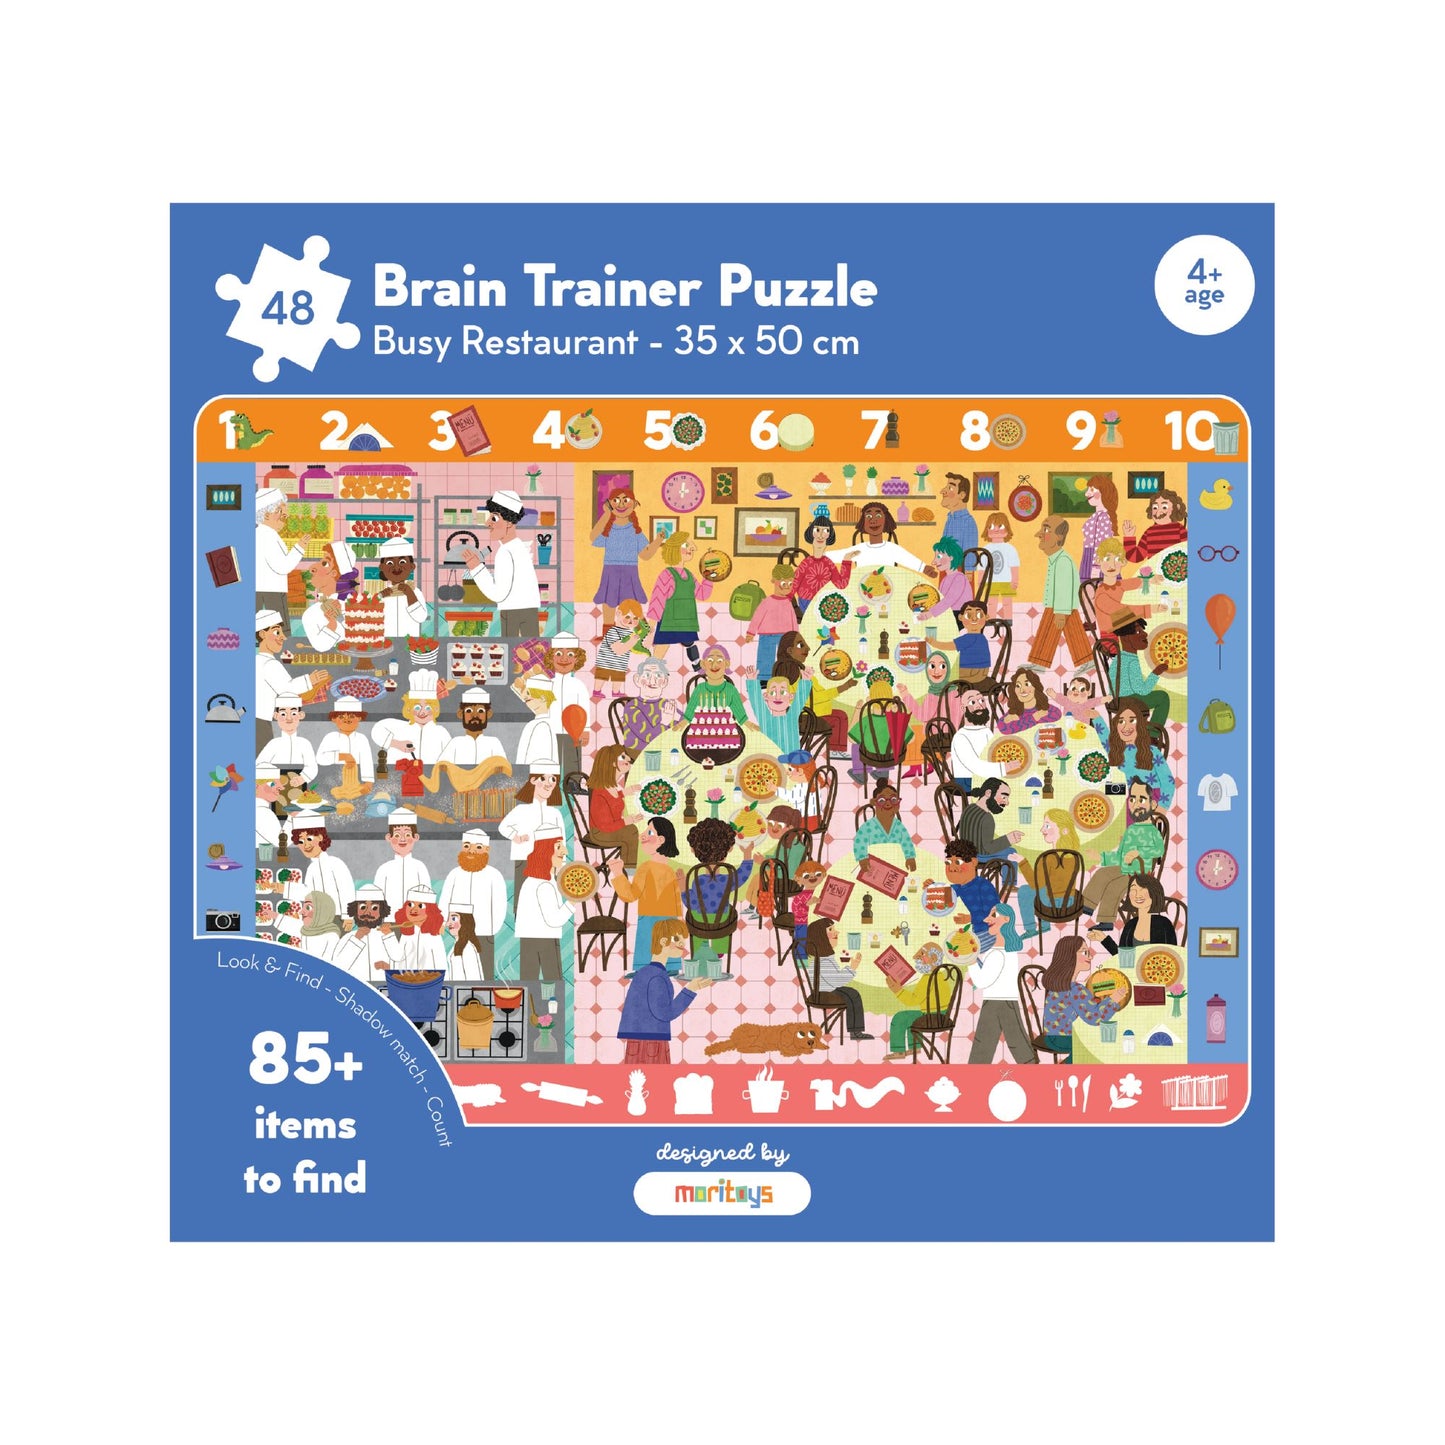 Brain Trainer Puzzle: Busy Restaurant moritoys 